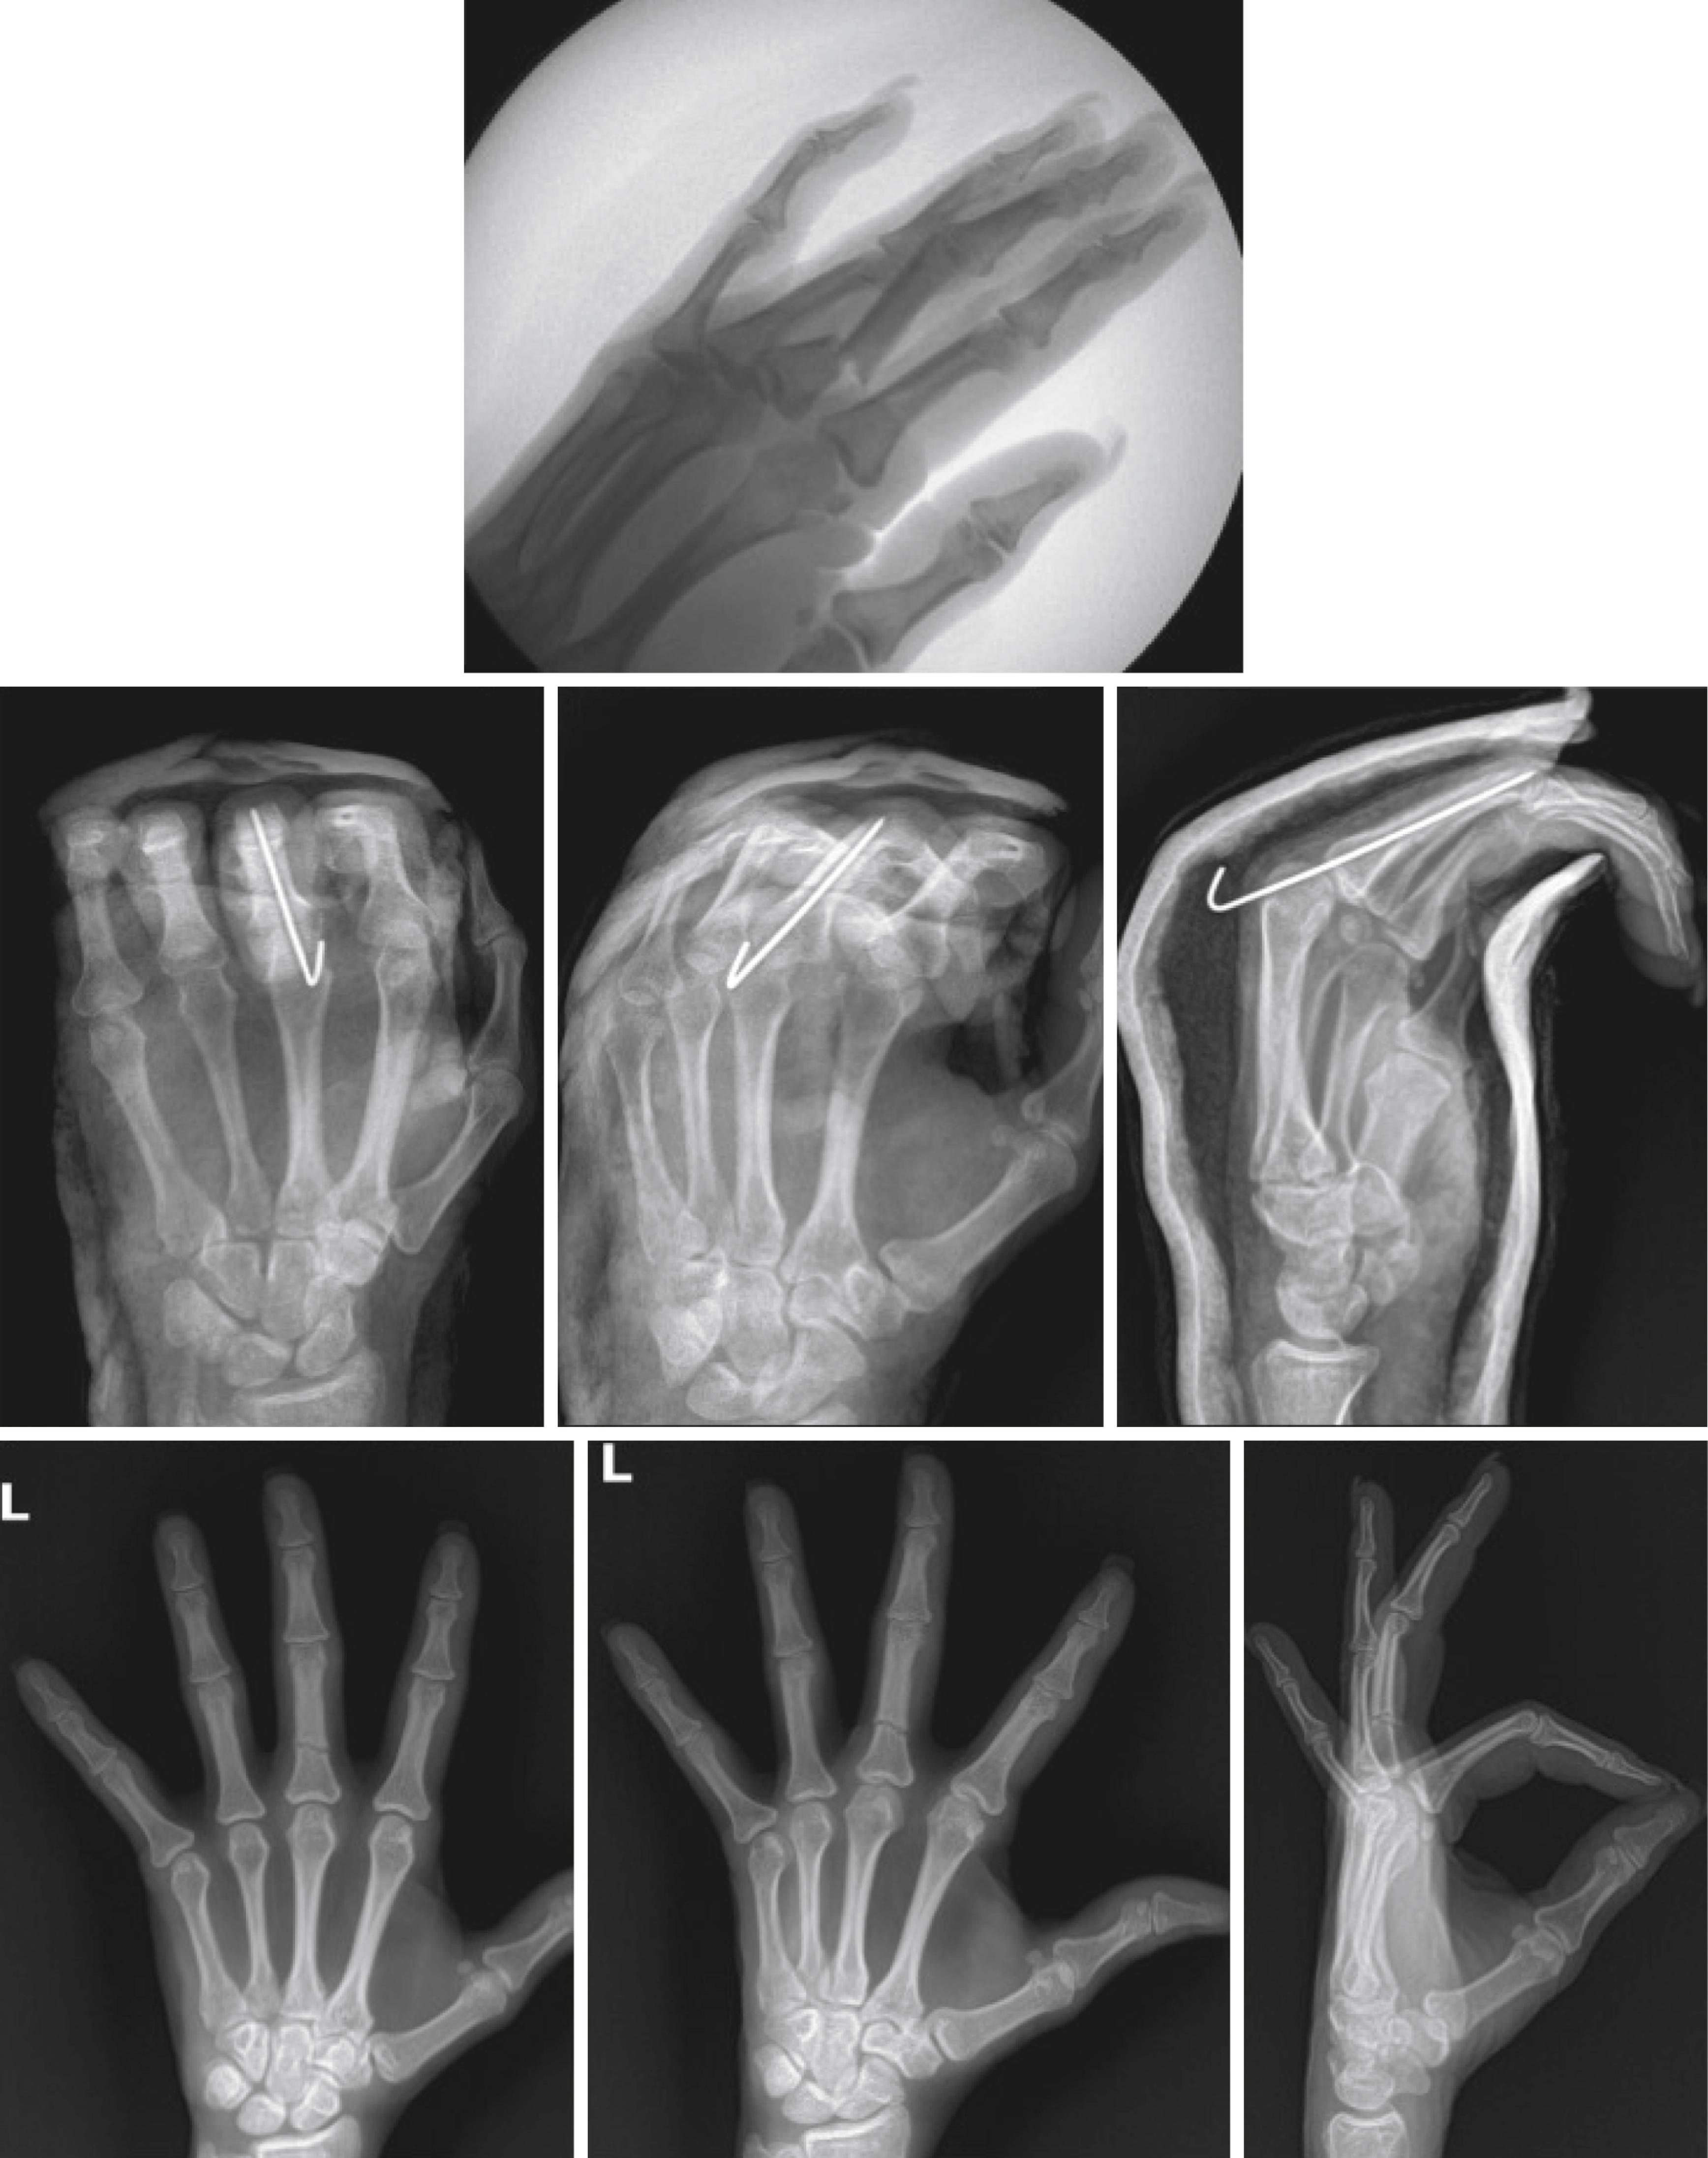 Fig. 79.1, A 48-year-old woman who sustained an extra-articular base fracture of her middle finger proximal phalanx, treated with closed reduction and transarticular pinning (Belsky technique).